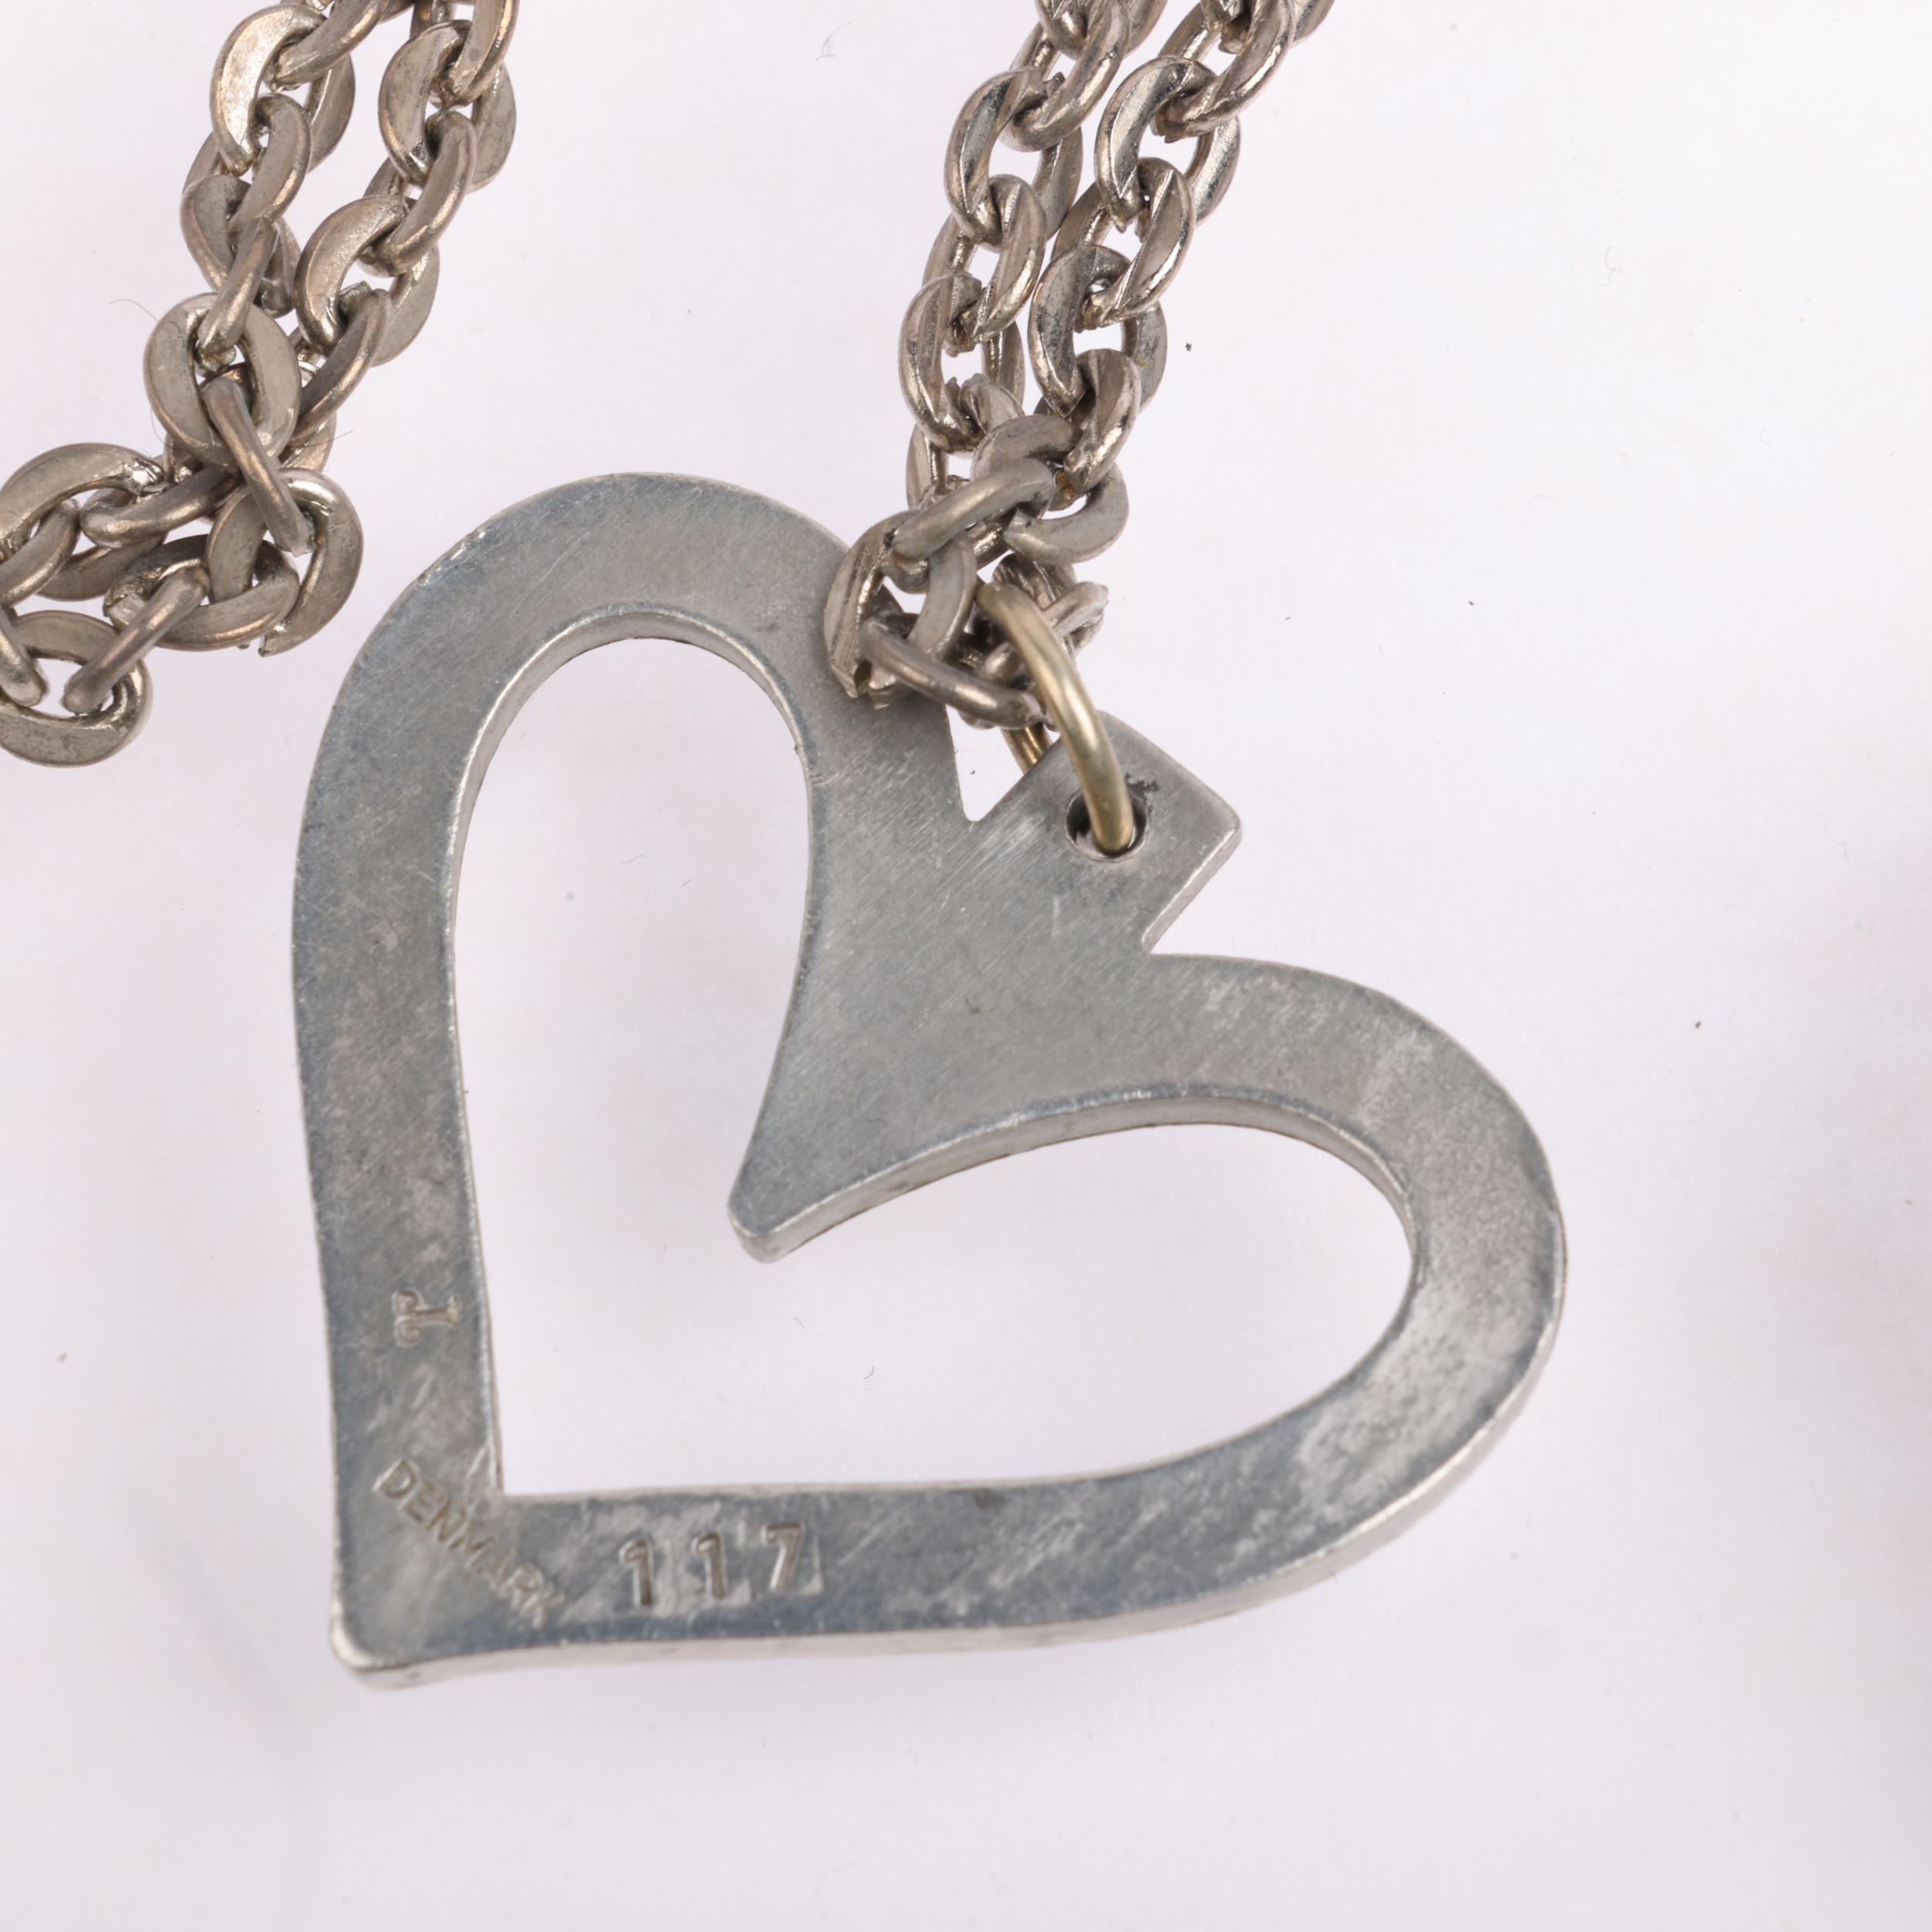 STIGBERT - 2 Swedish brutalist pewter pendant necklaces, including heart example, 39.2mm (2) - Image 3 of 3